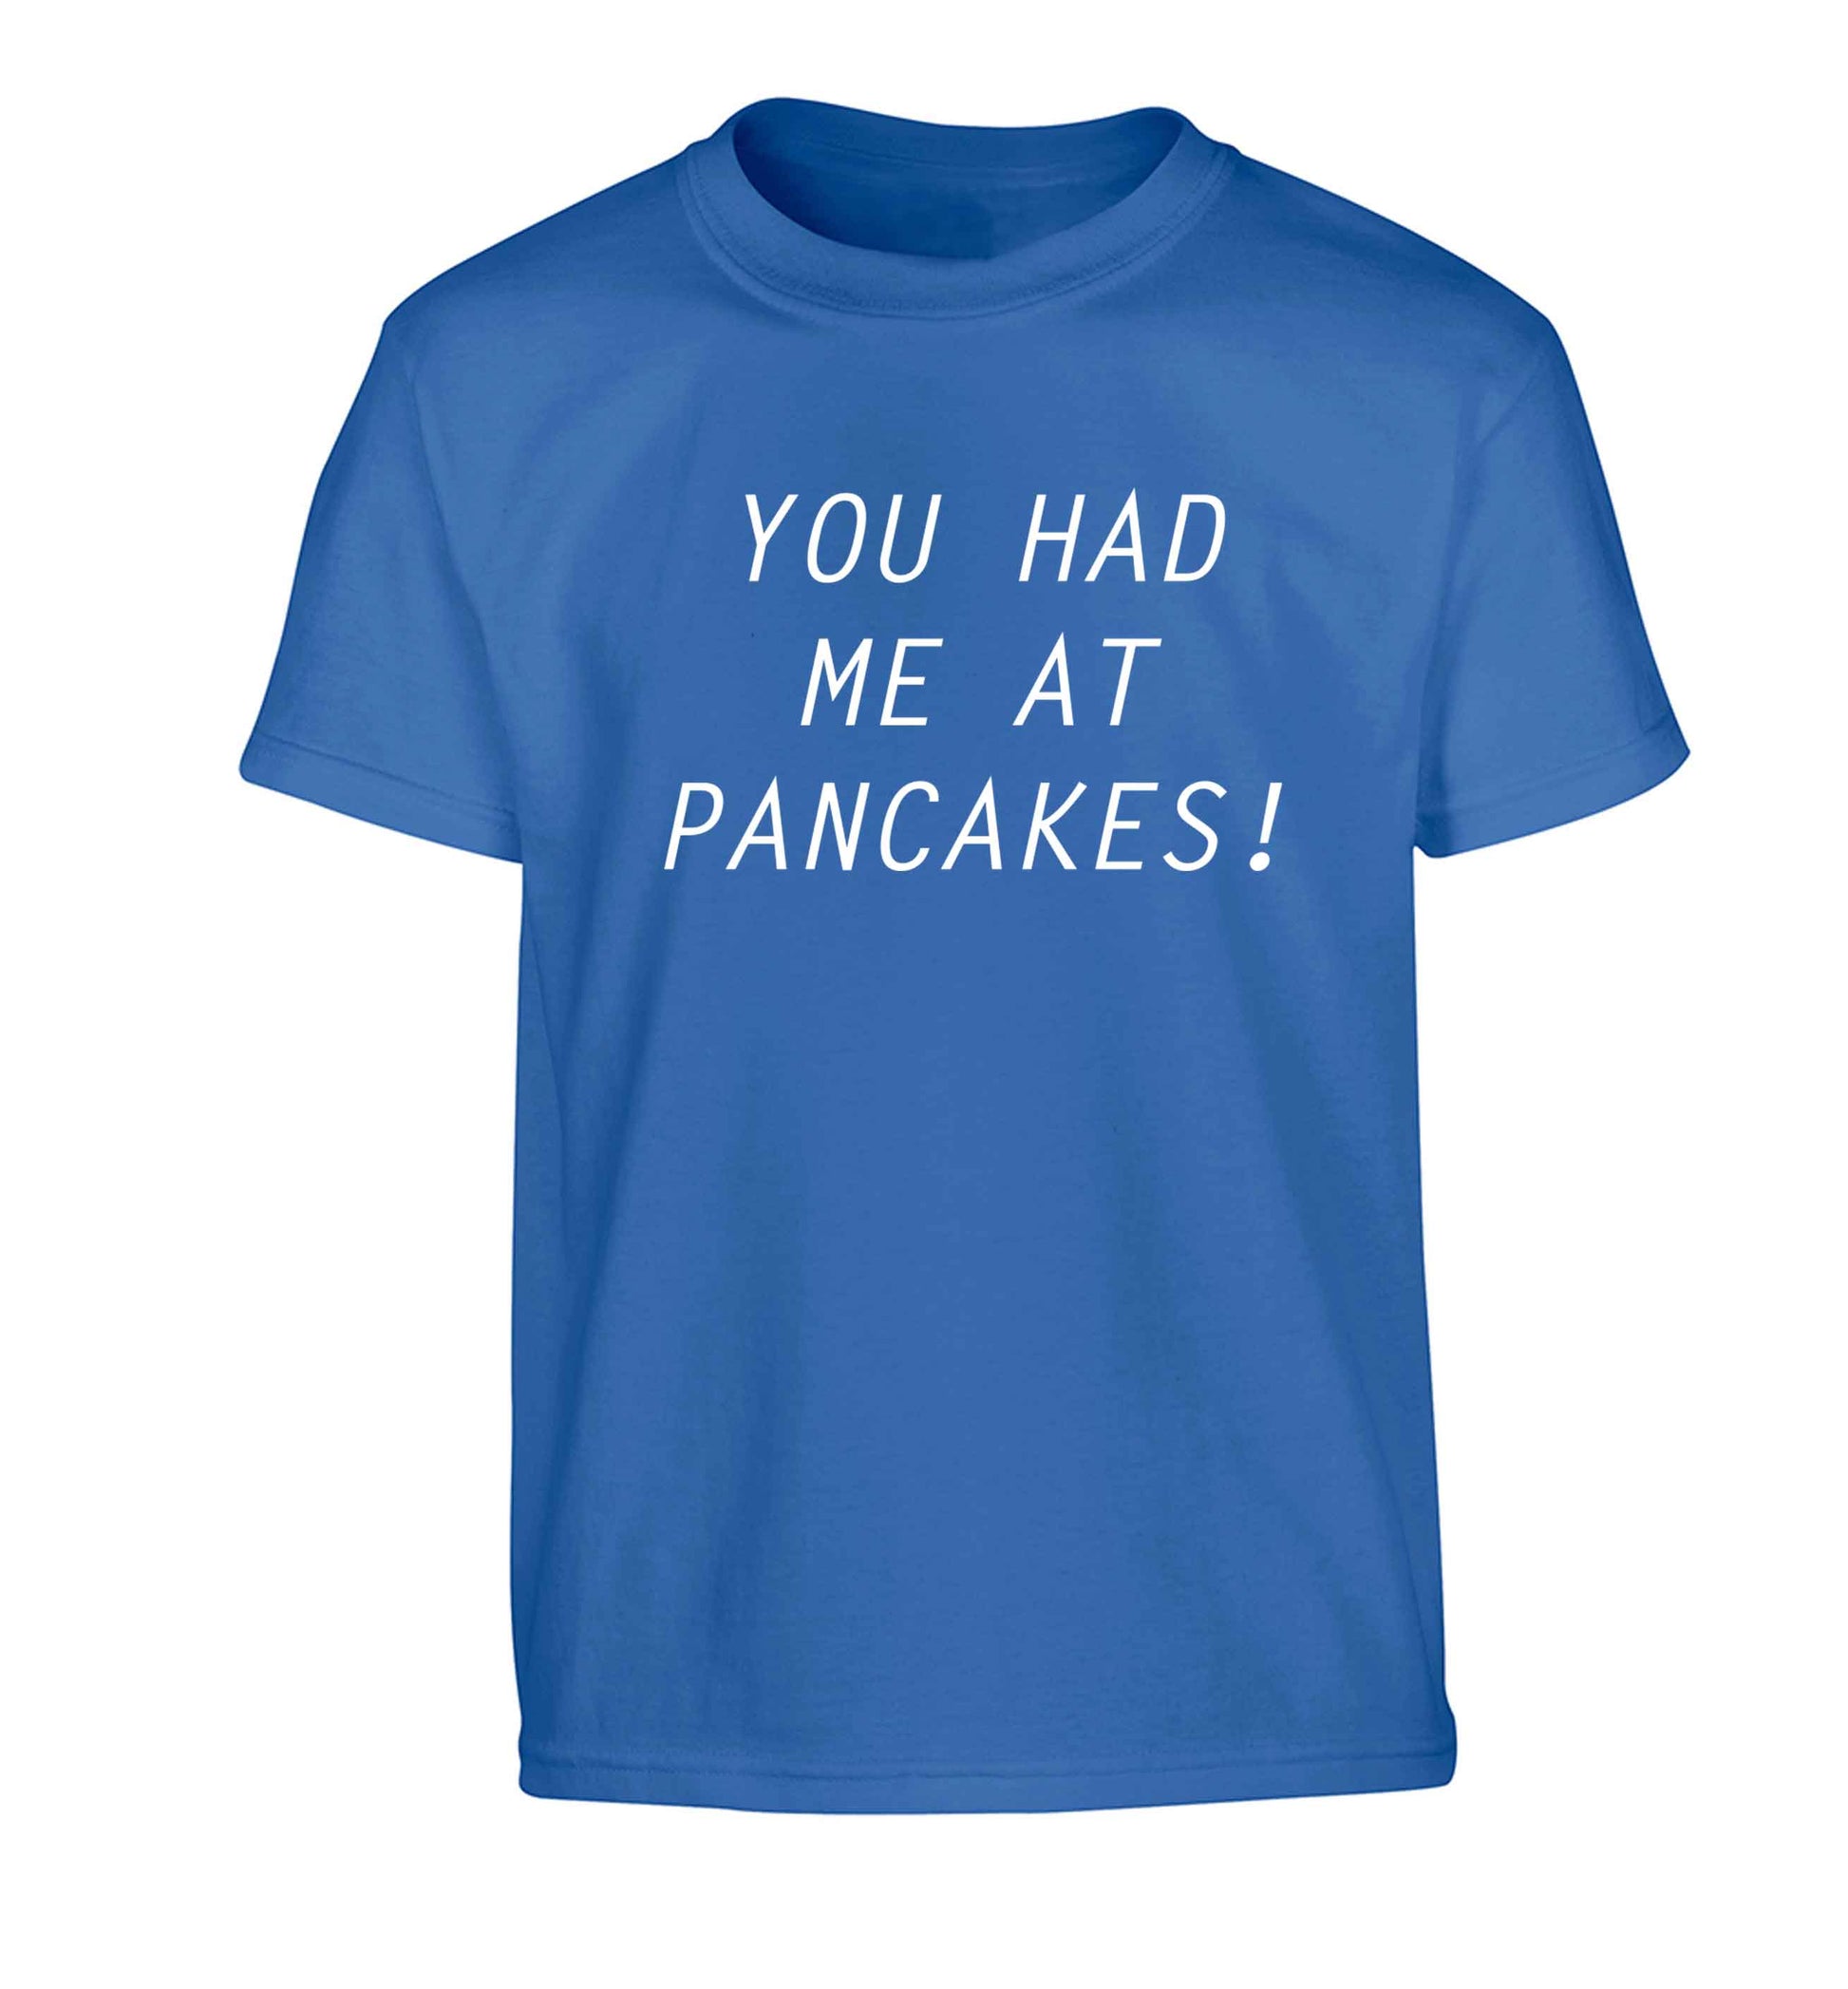 You had me at pancakes Children's blue Tshirt 12-13 Years